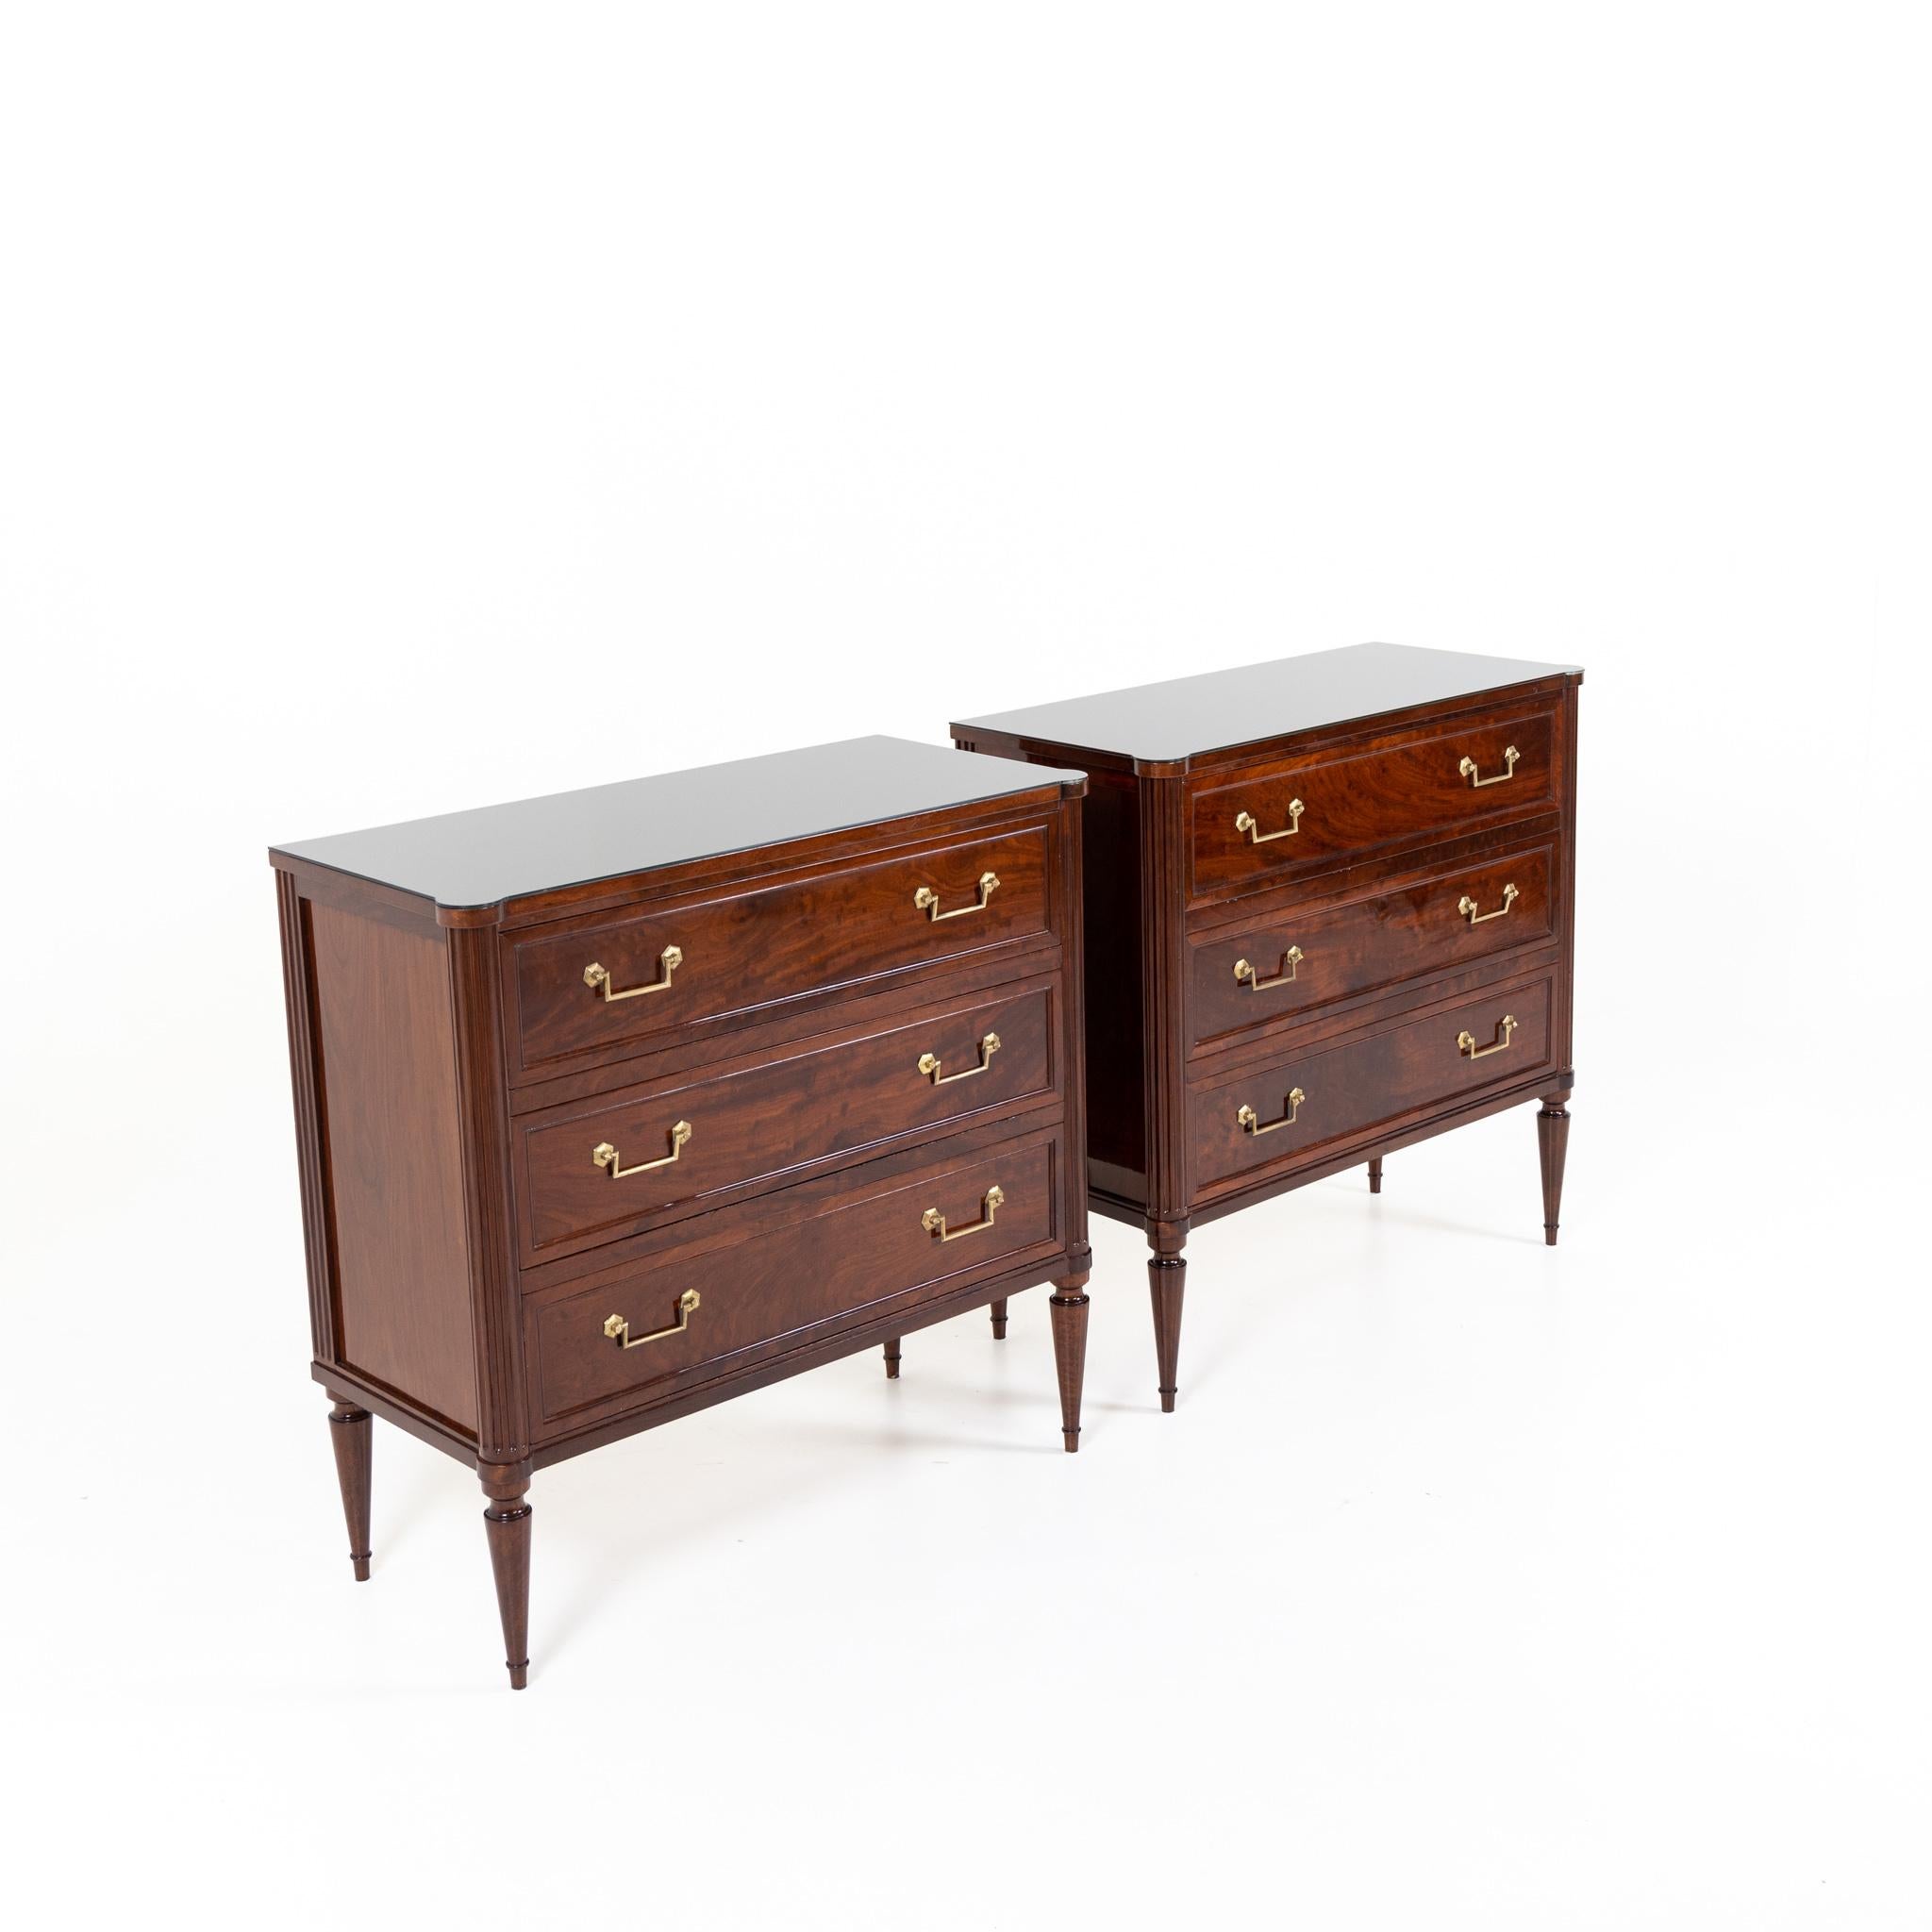 Pair of Late 19th Century Three Drawer chests with glass tops.
Mahogany with fluted details, brass pulls,
and contemporary black glass tops.